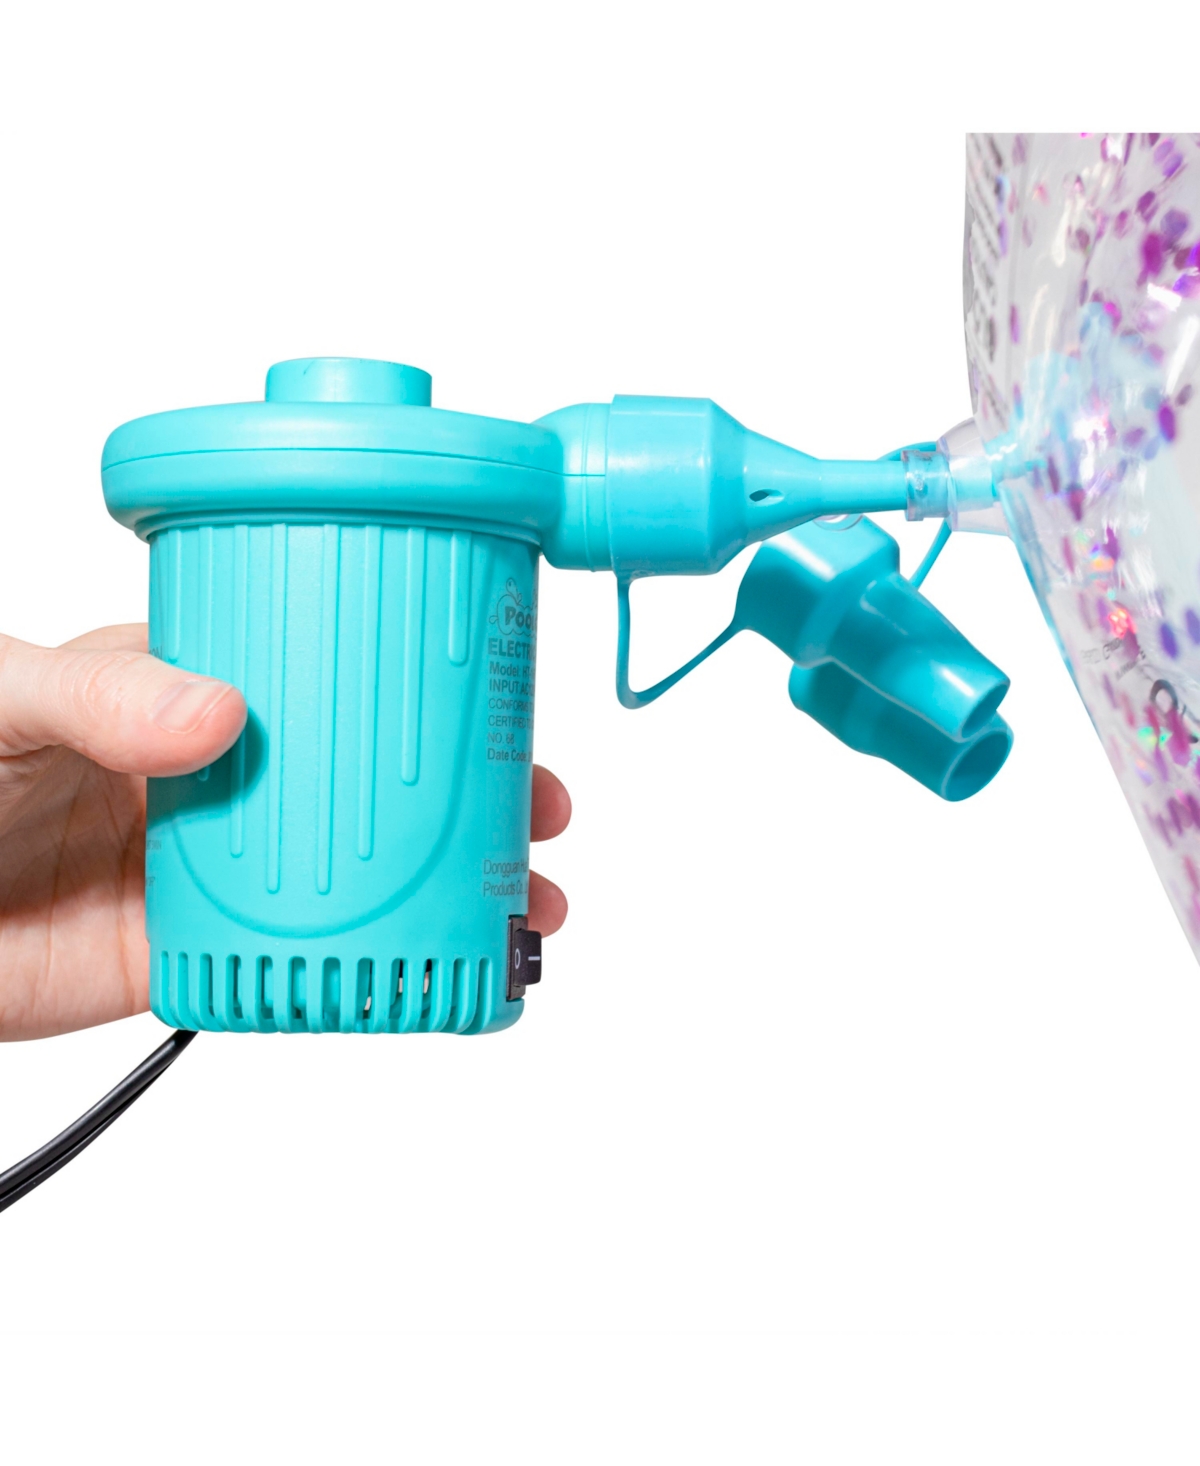 Poolcandy Inflate-mate Electric Pump In Blue